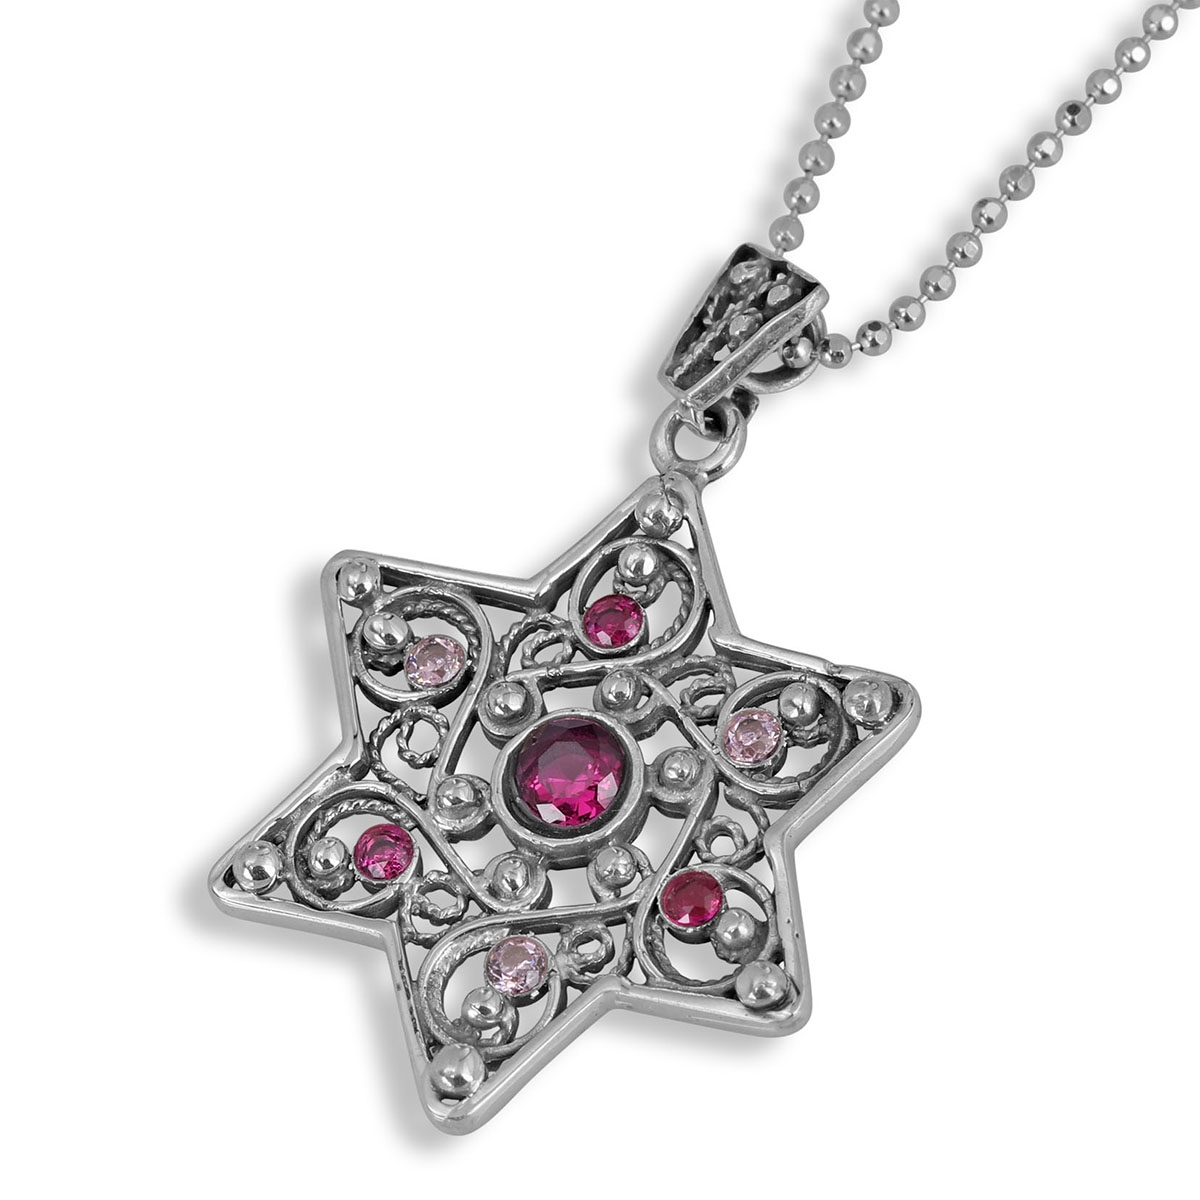 Rafael Jewelry Star of David with Quartz and Ruby Gemstones Silver Necklace - 1